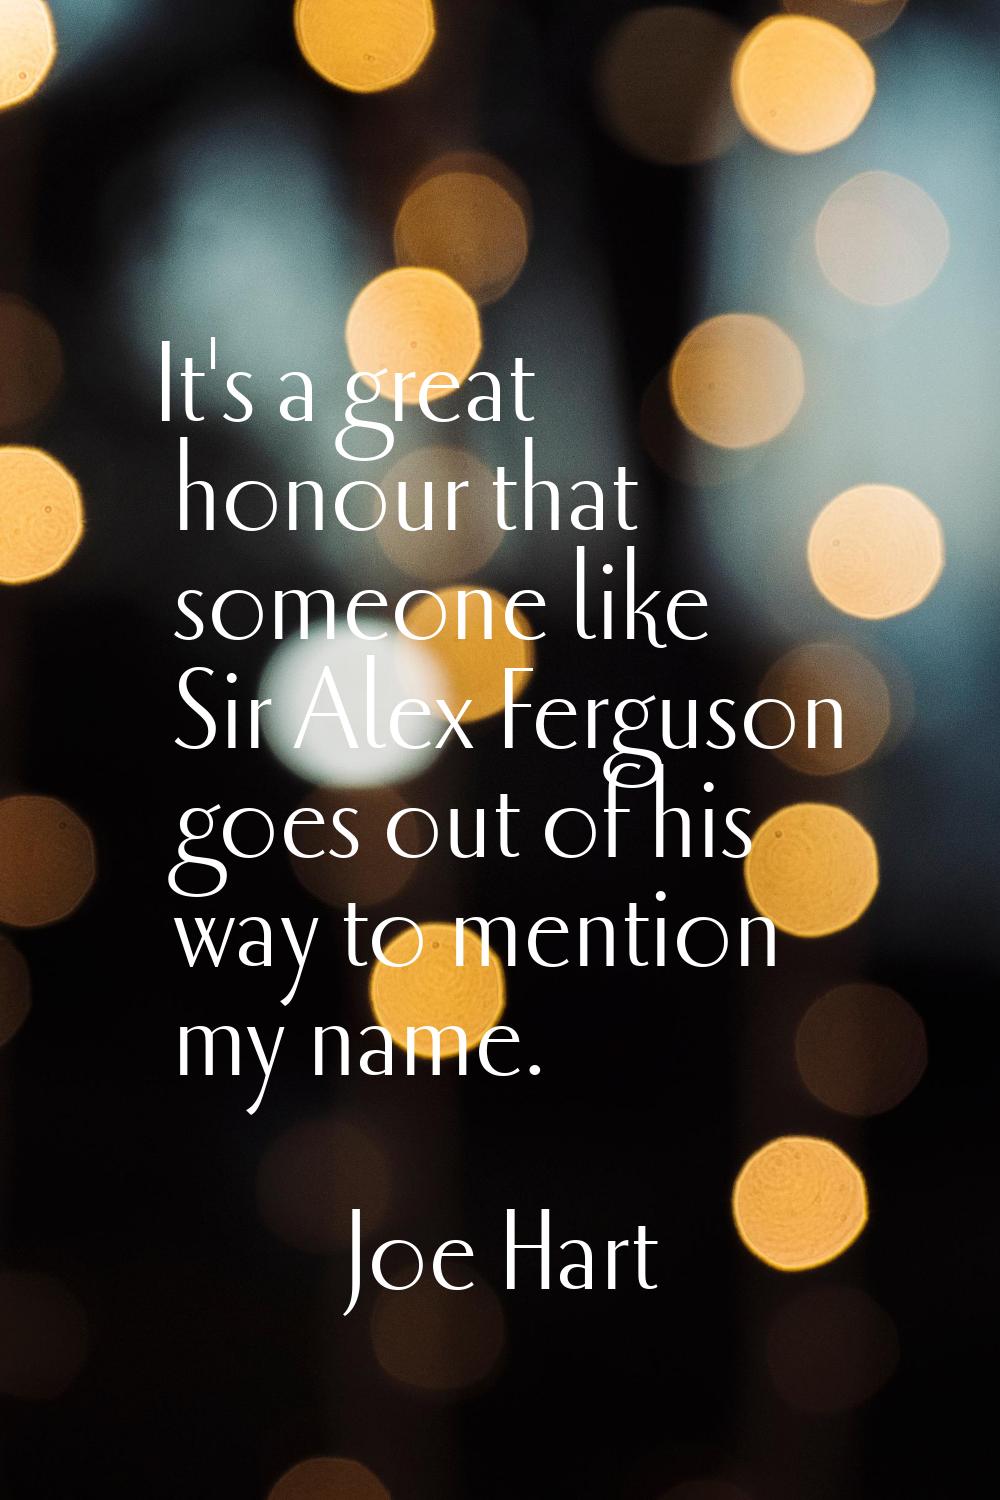 It's a great honour that someone like Sir Alex Ferguson goes out of his way to mention my name.